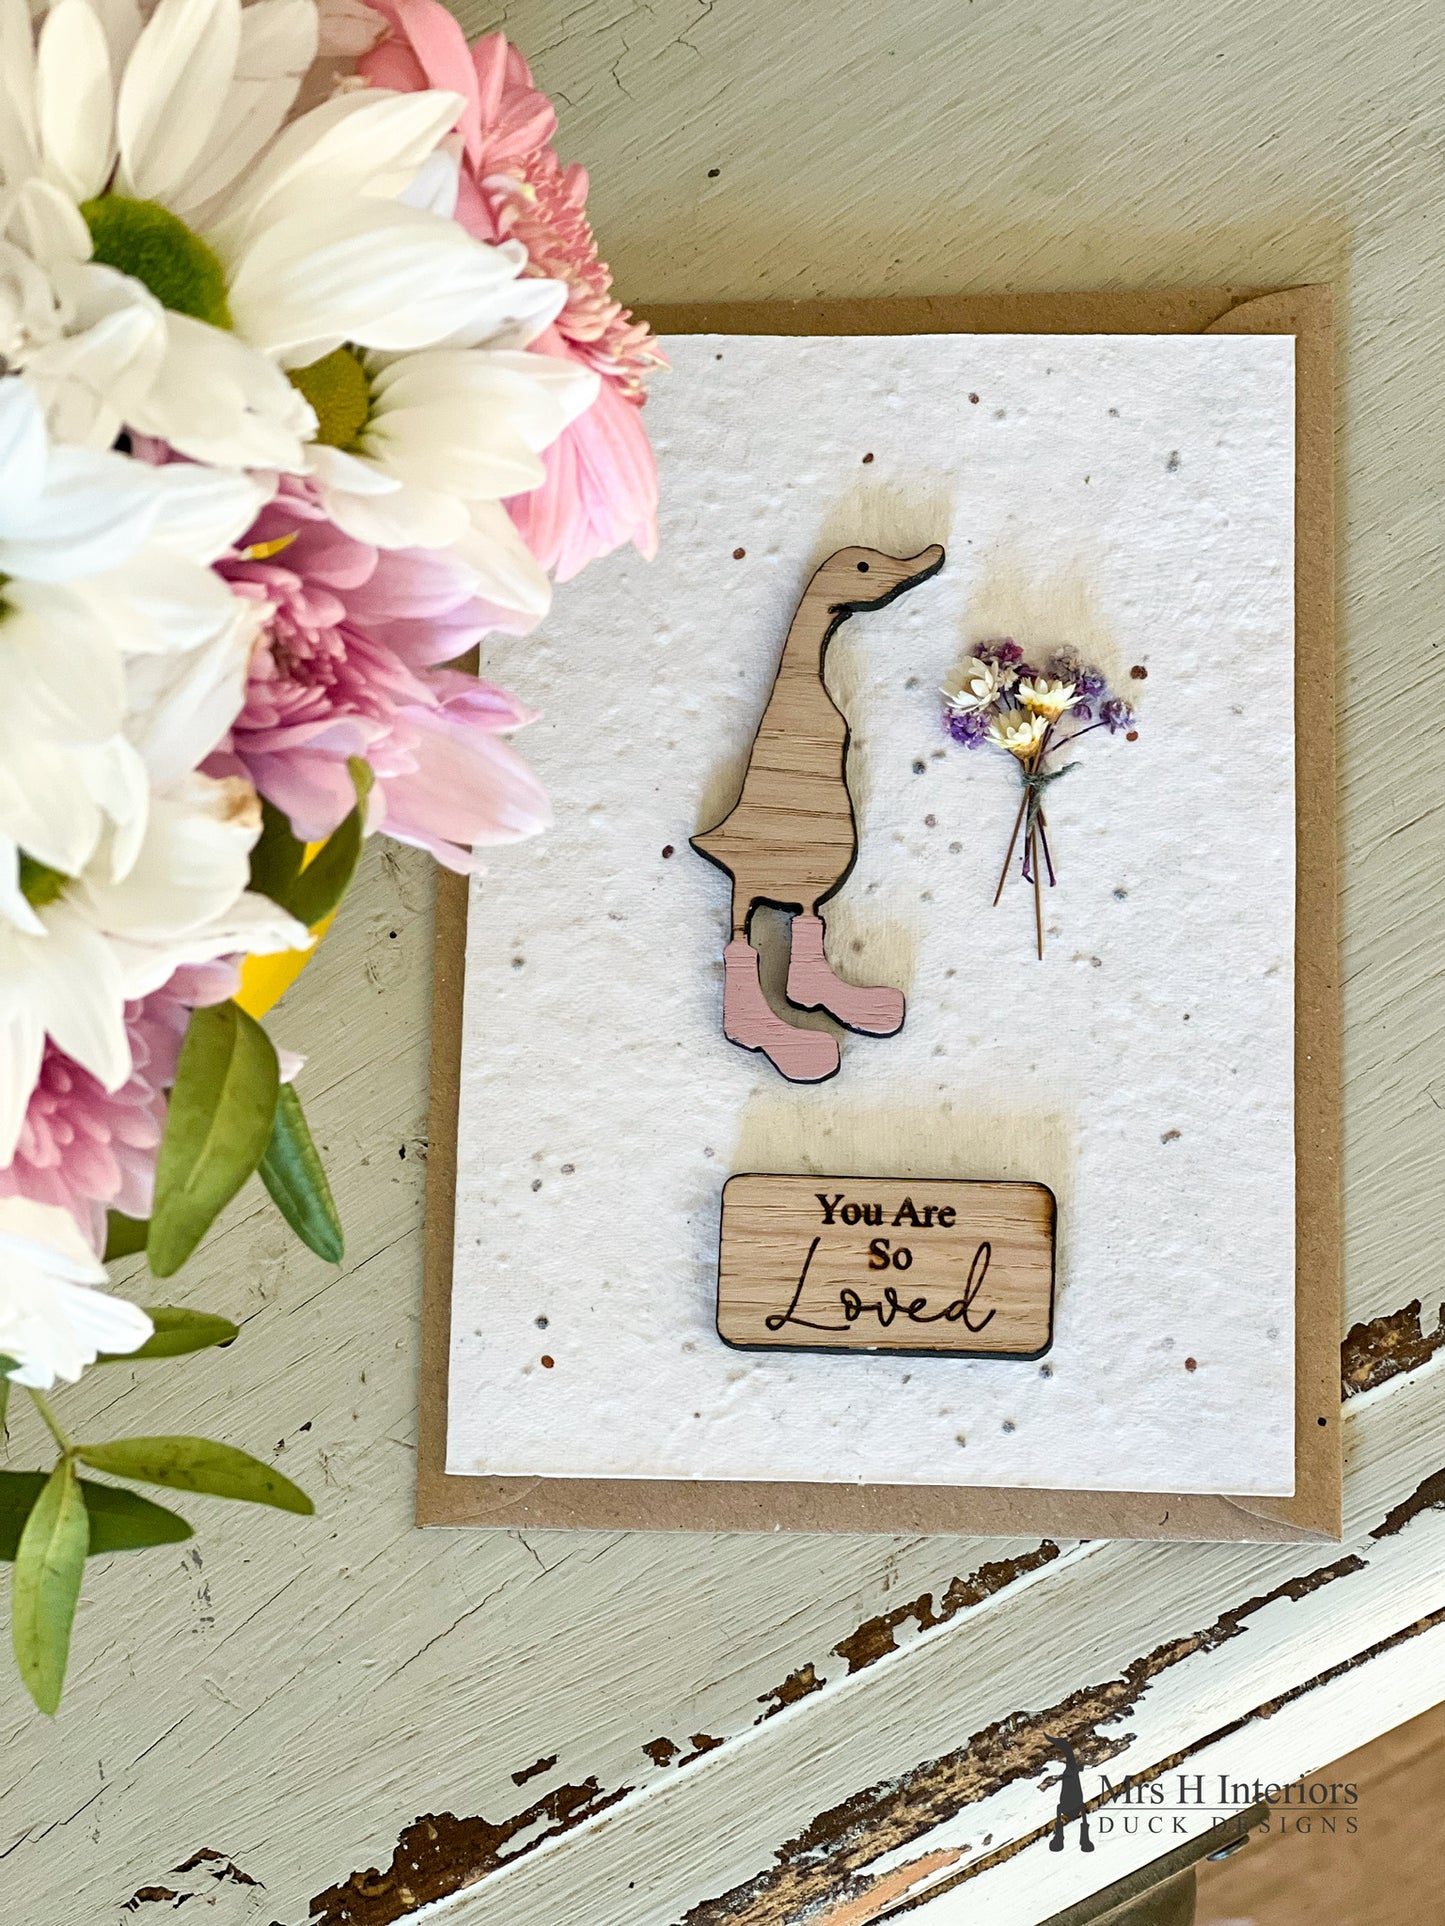 You Are So Loved - Duck with Flowers - Greetings Card - Decorated Wooden Duck in Boots by Mrs H the Duck Lady